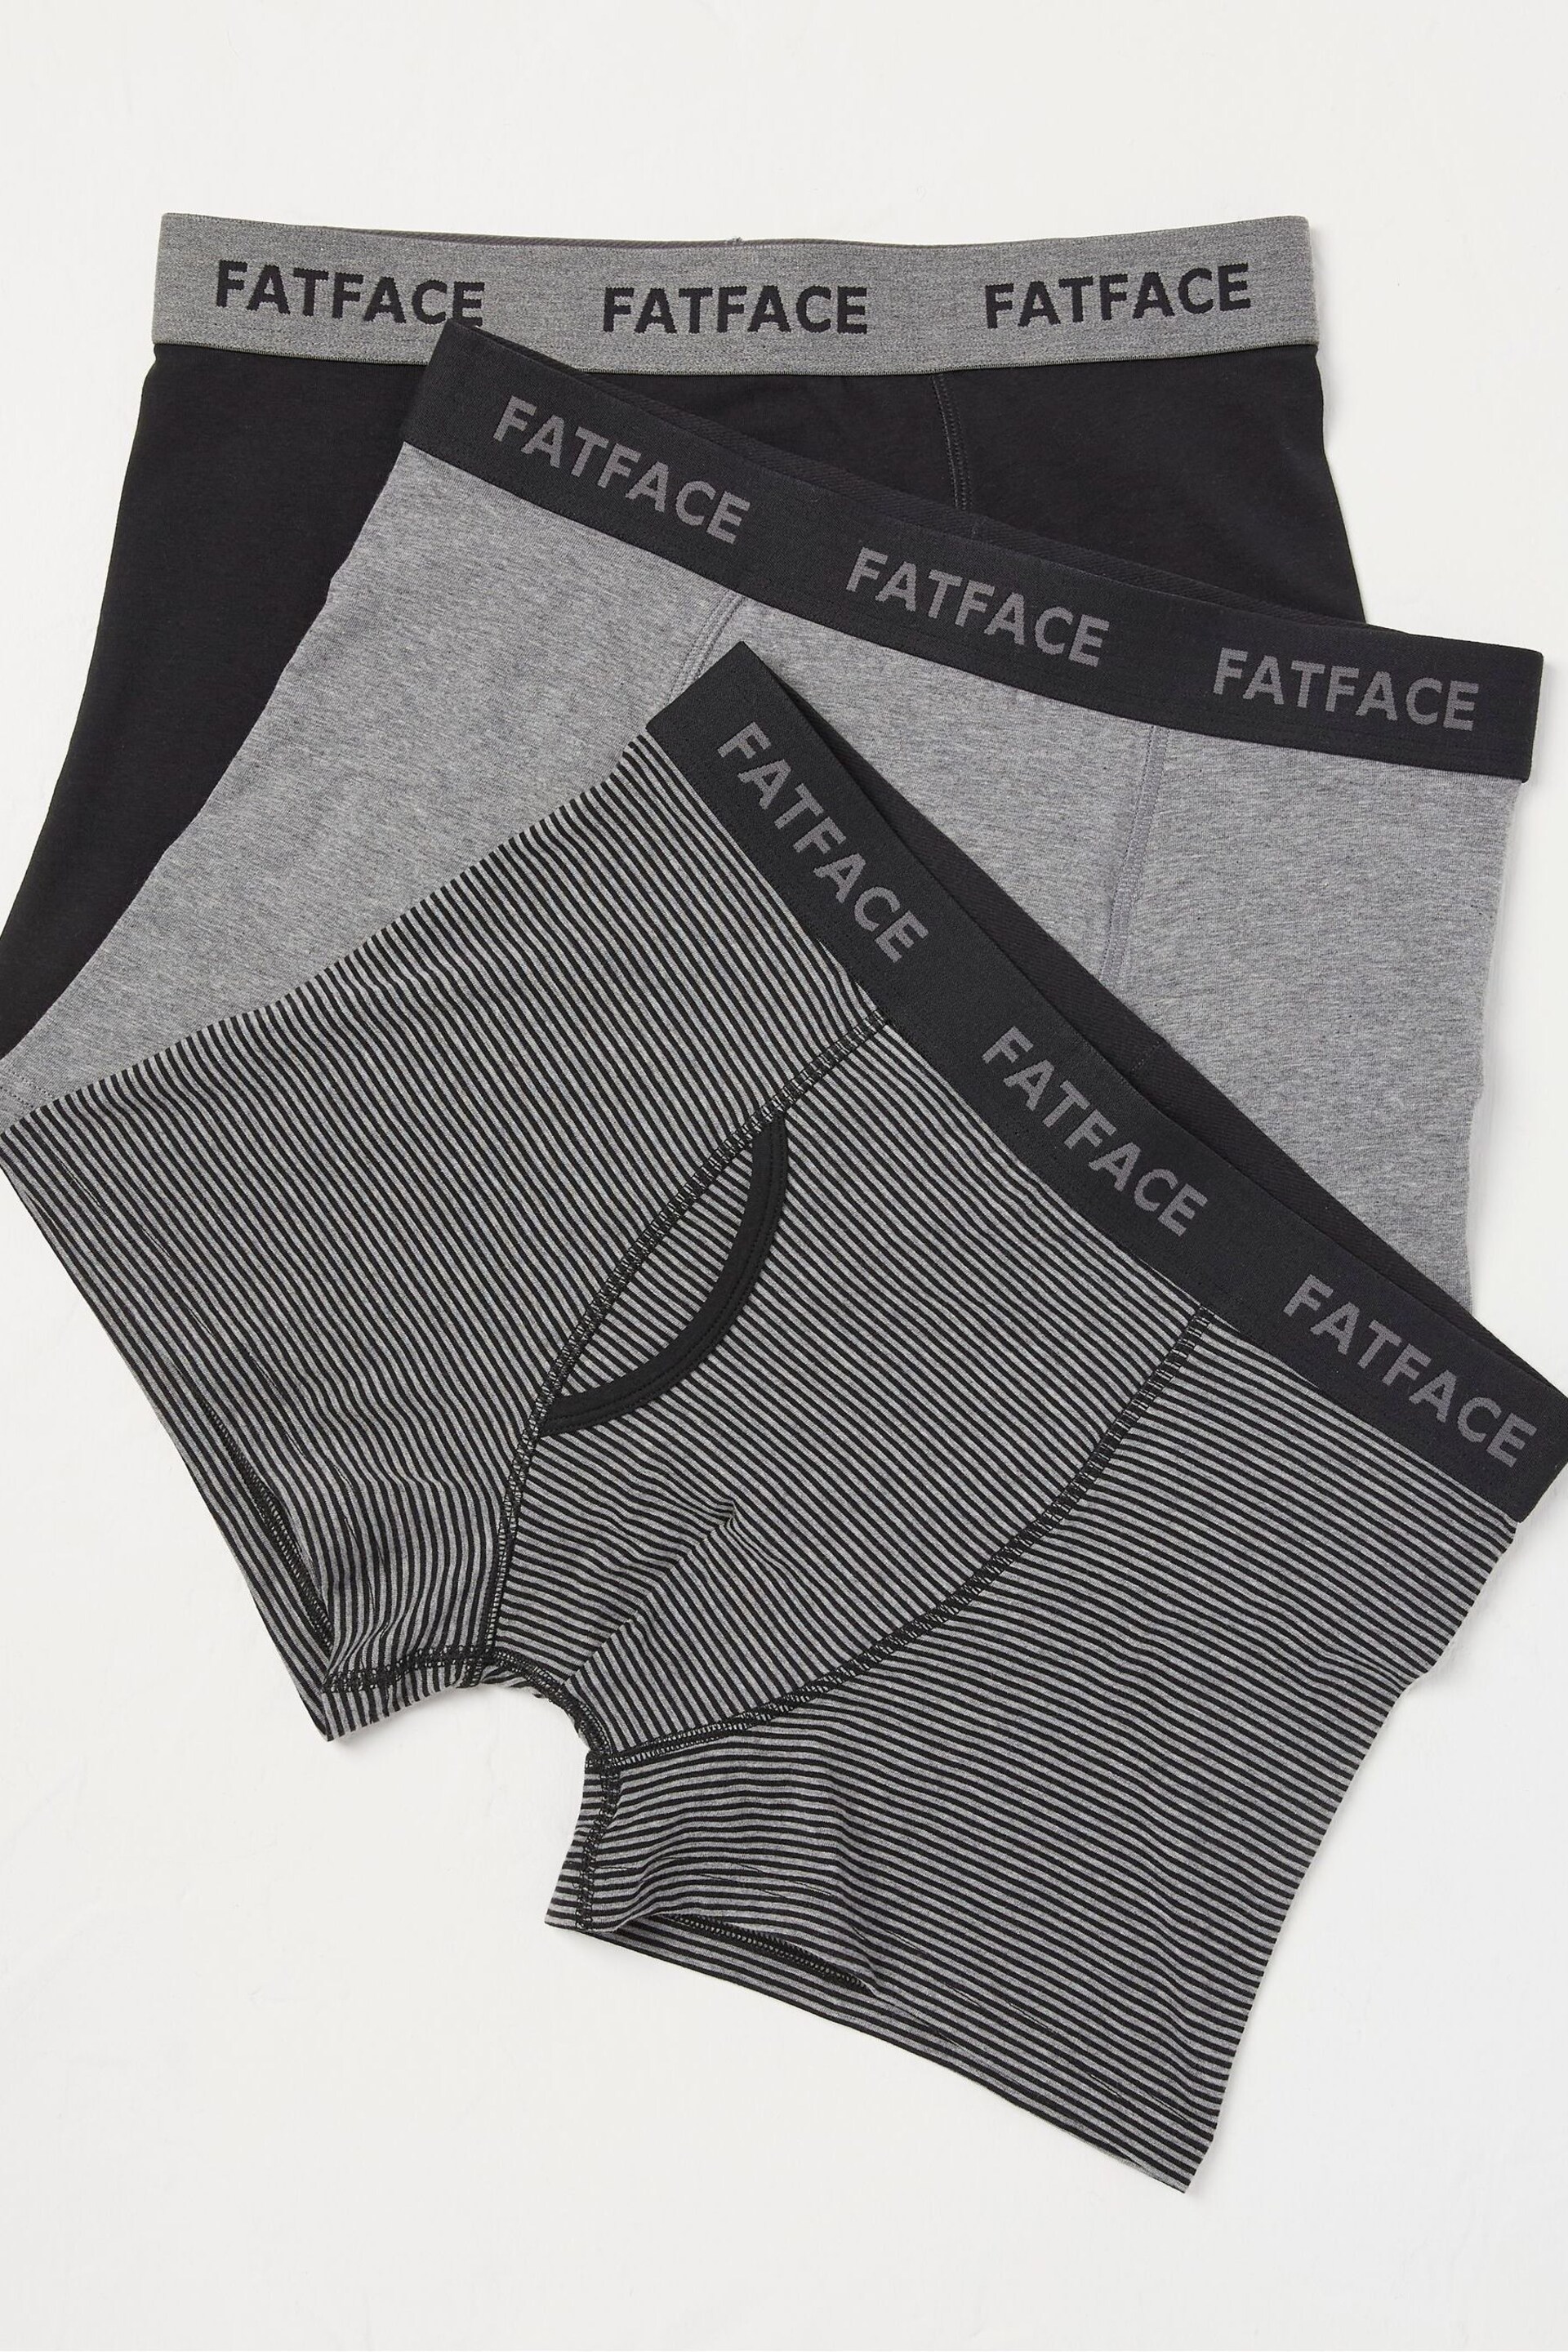 FatFace Grey Classic Stripe Boxers 3 Pack - Image 2 of 6